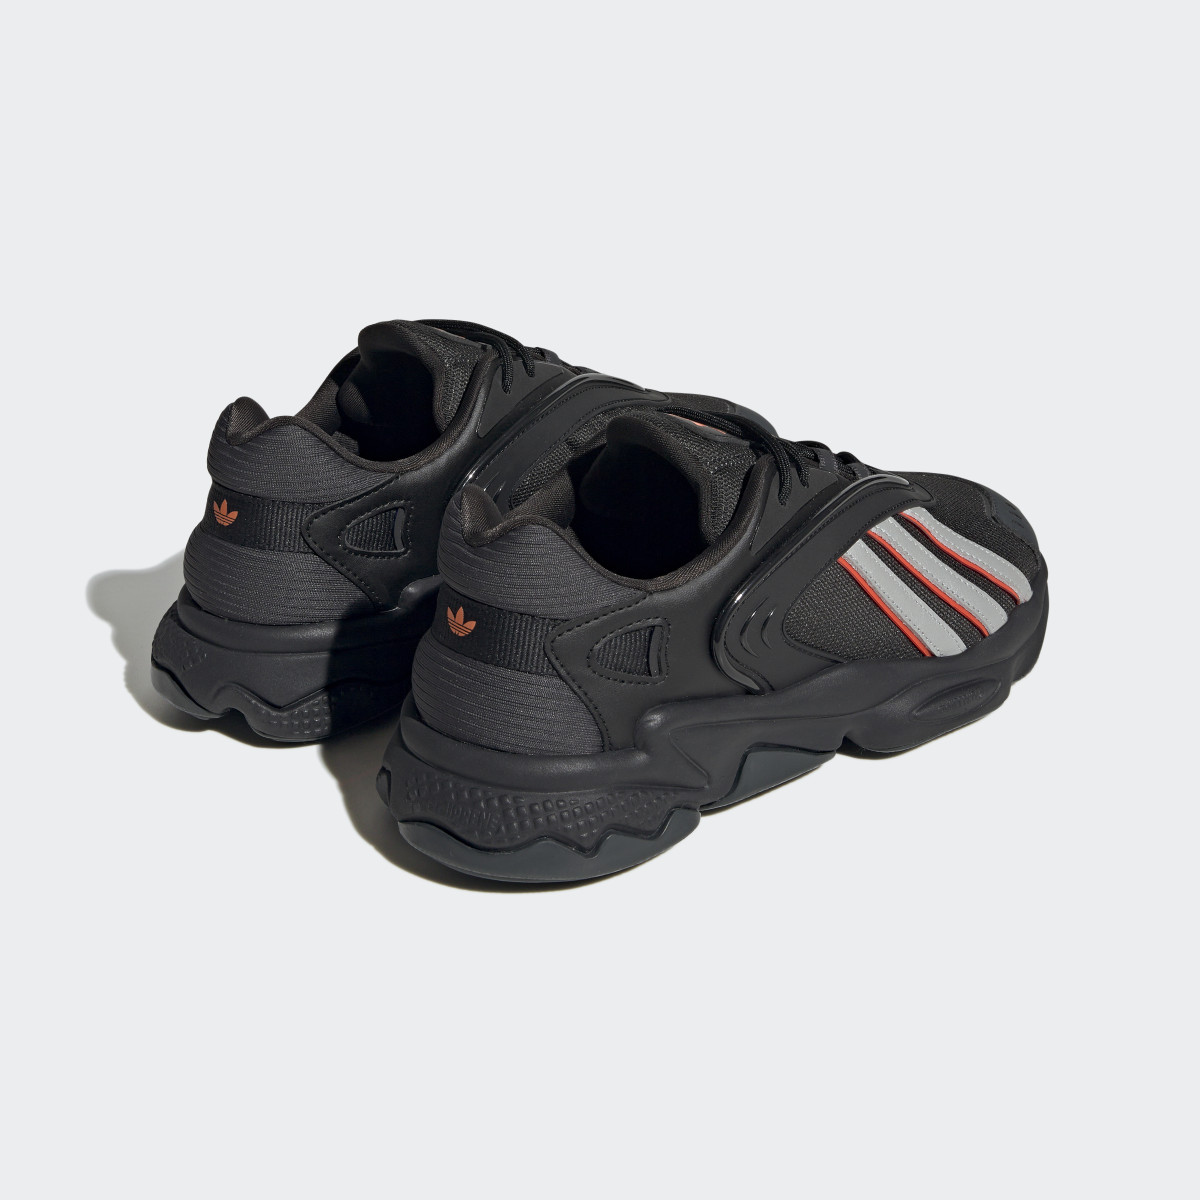 Adidas Oztral Shoes. 6